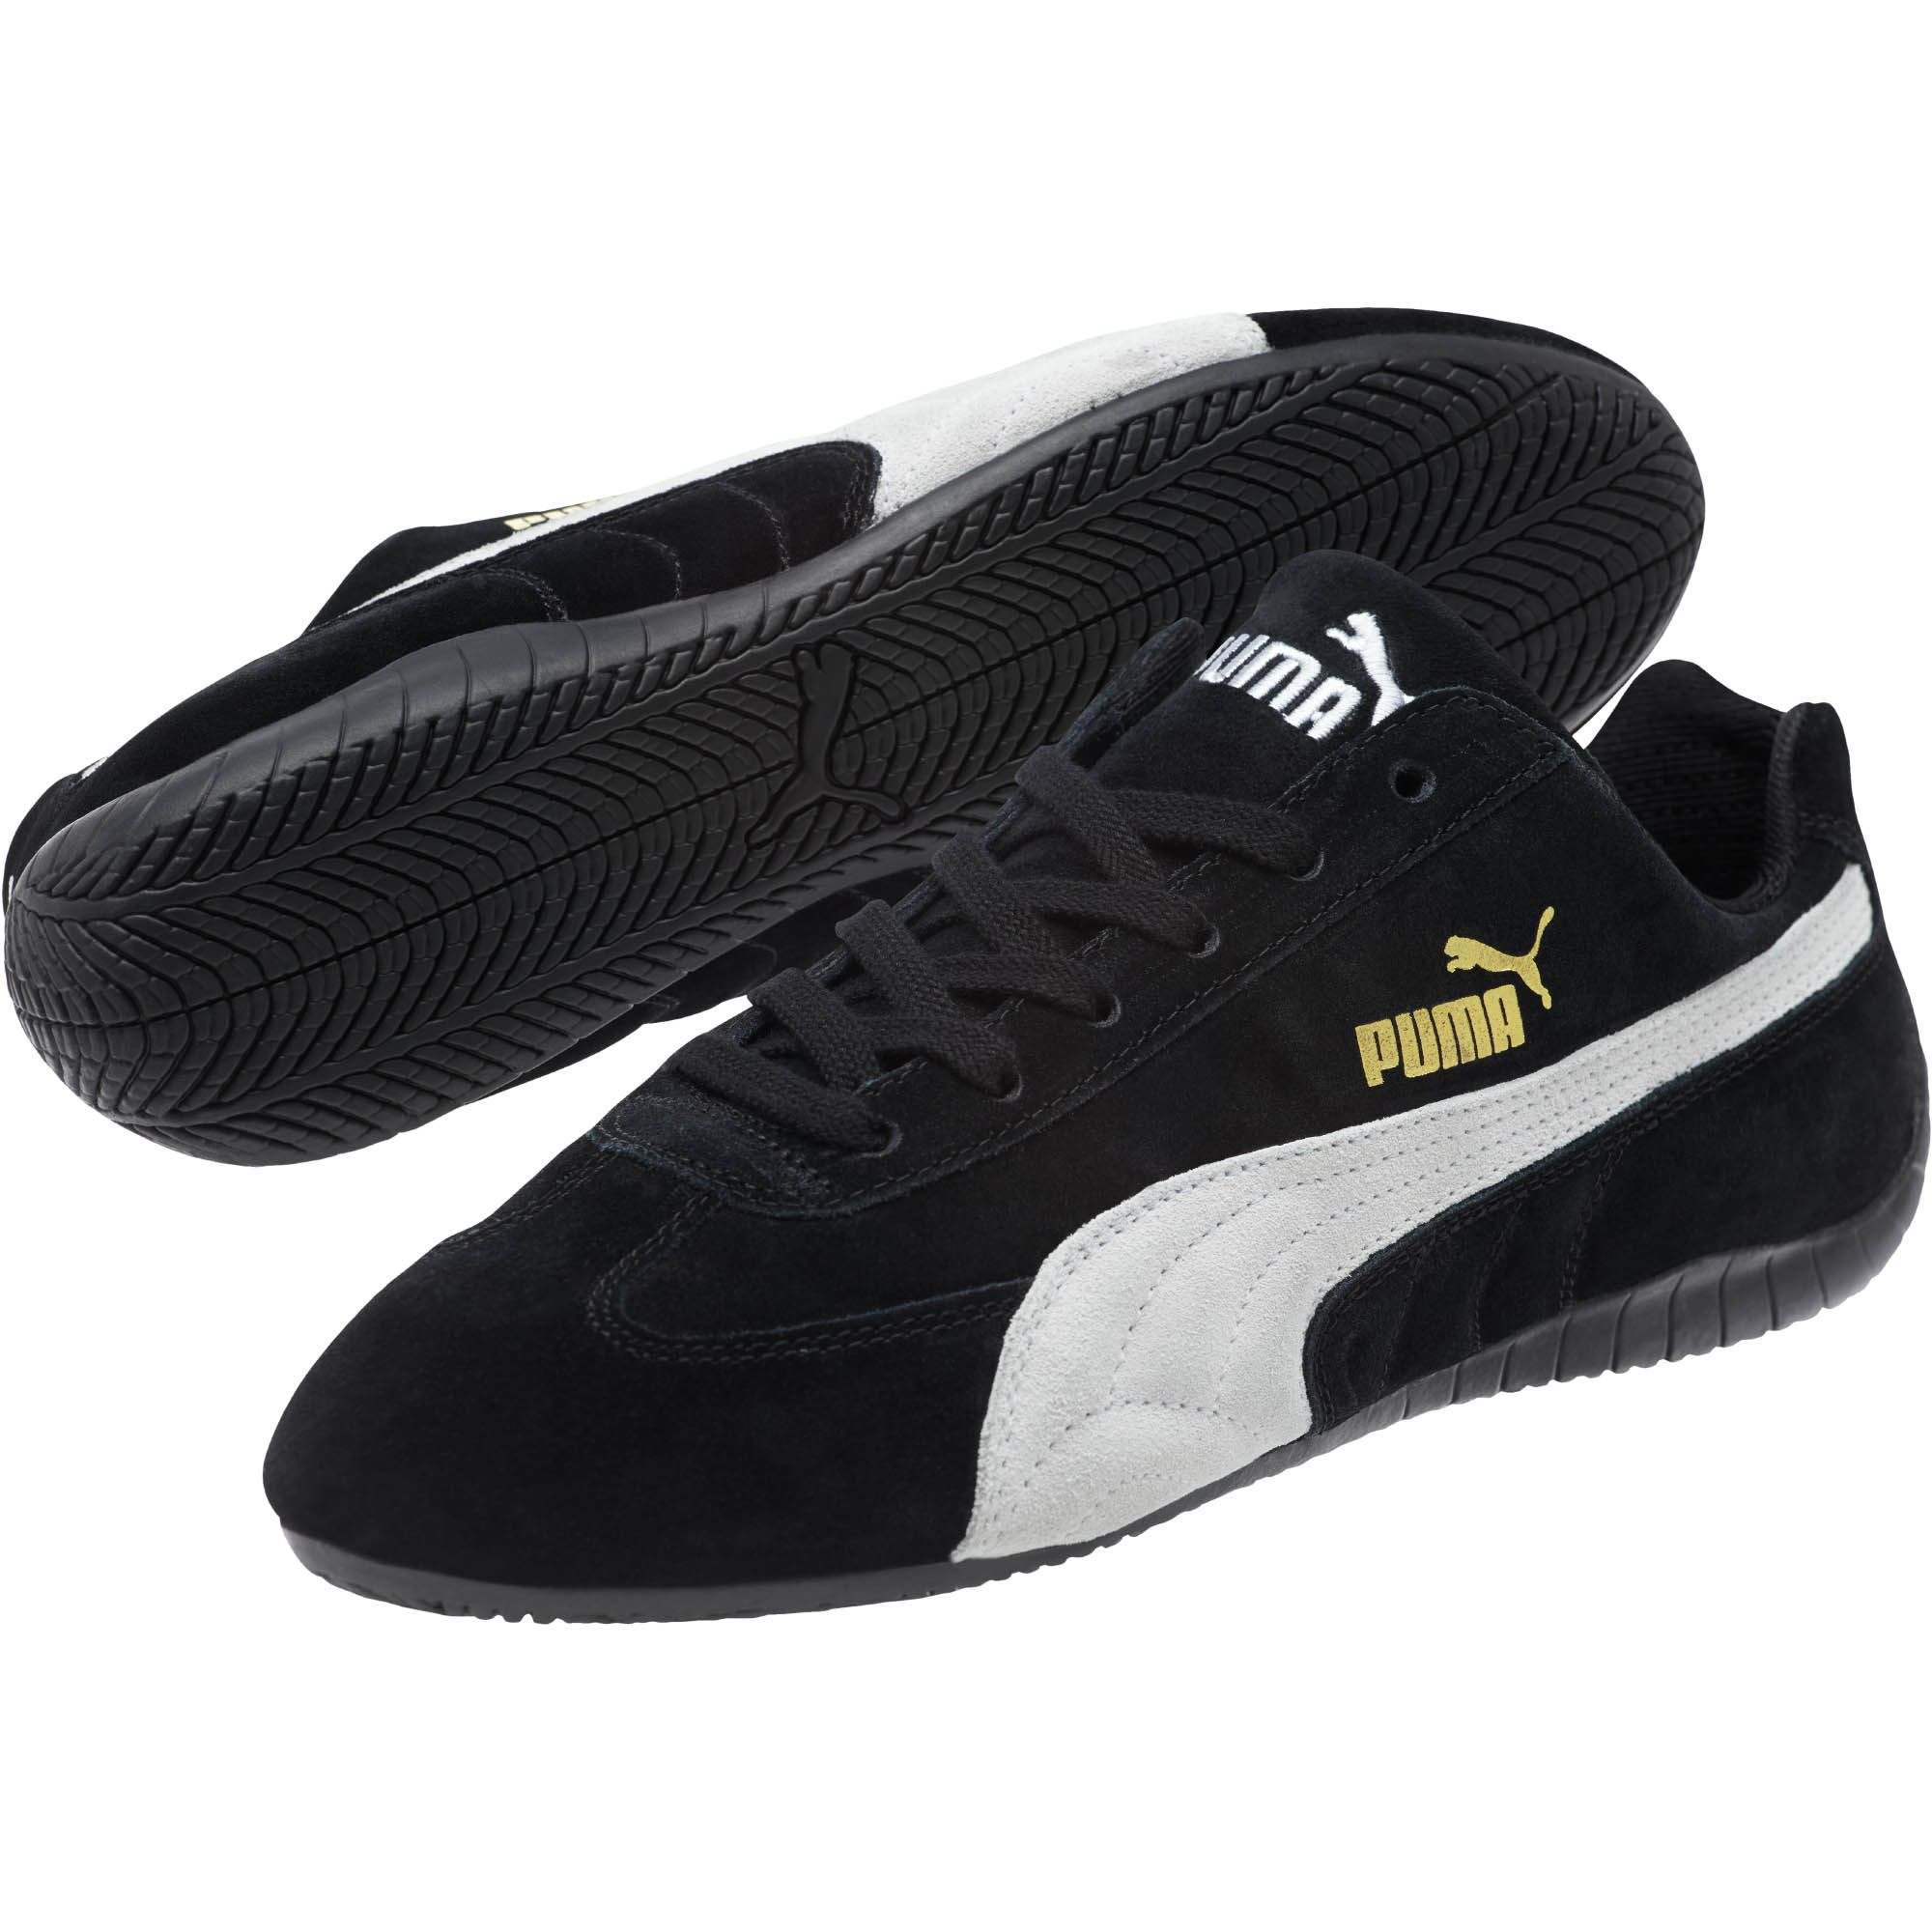 Lyst Puma Speed Cat Shoes in White for Men